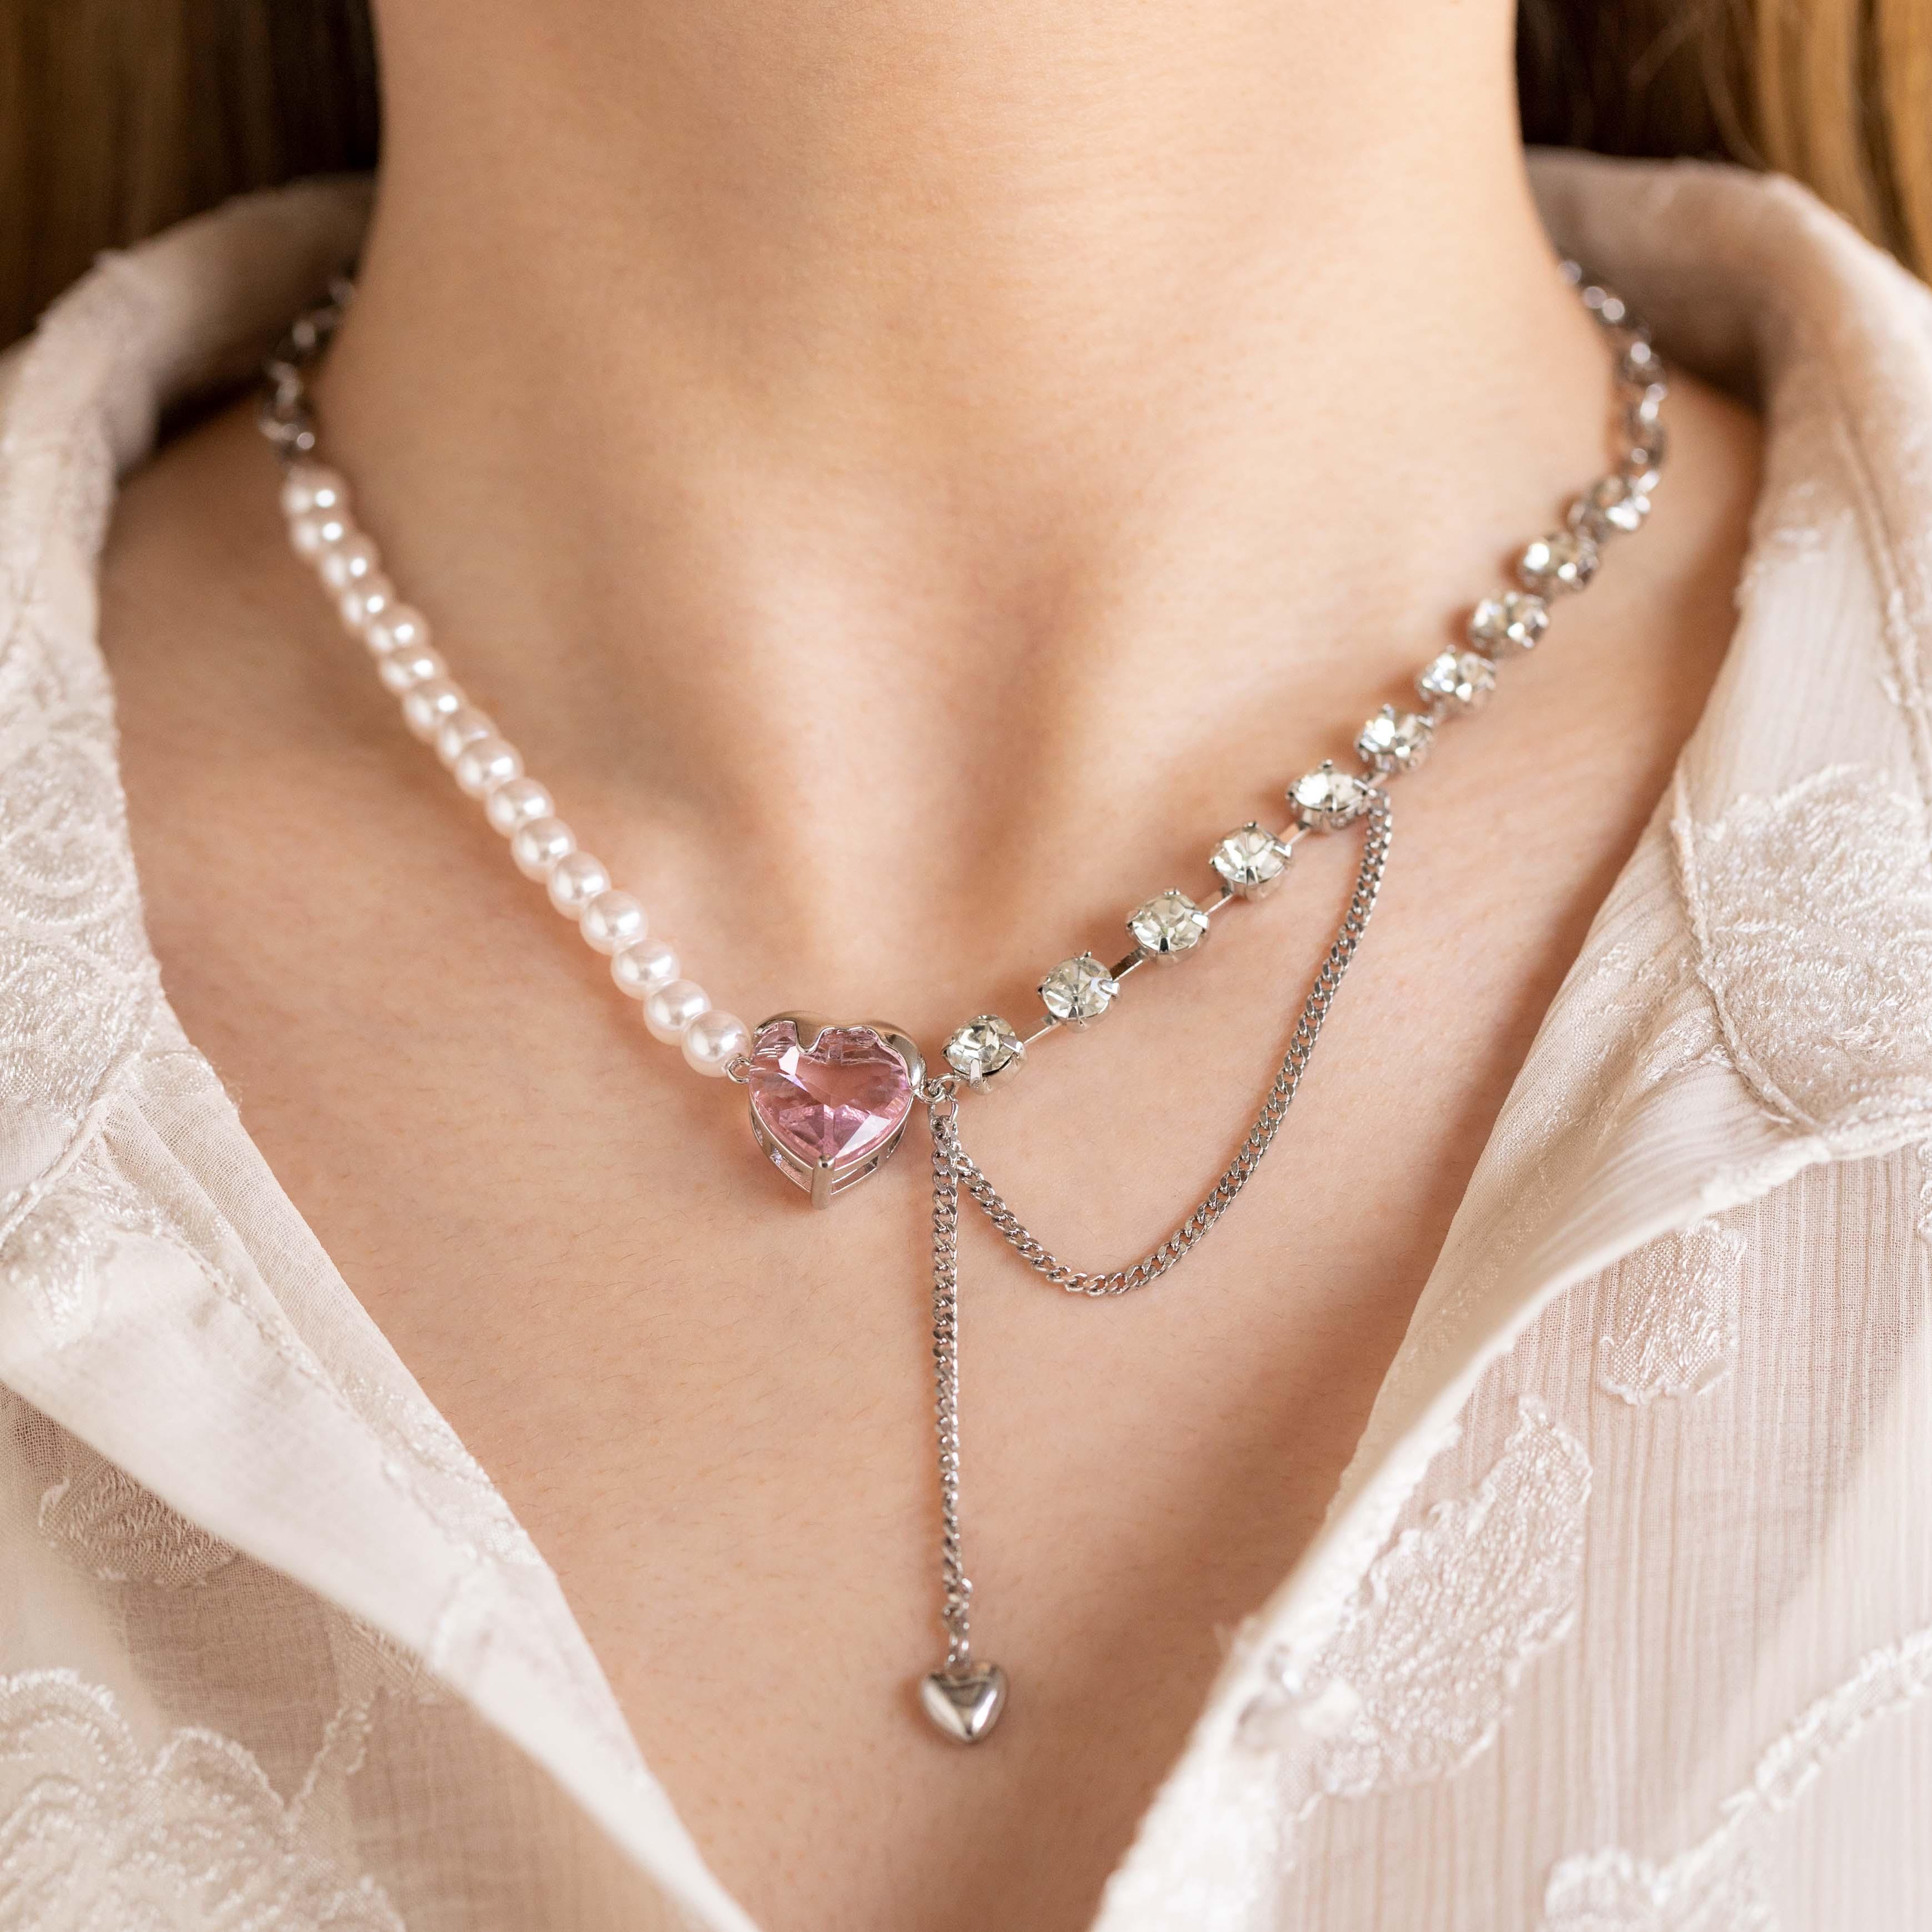 Silver Faux Pearl Chain and Heart Pendant Layered Necklace | New Look